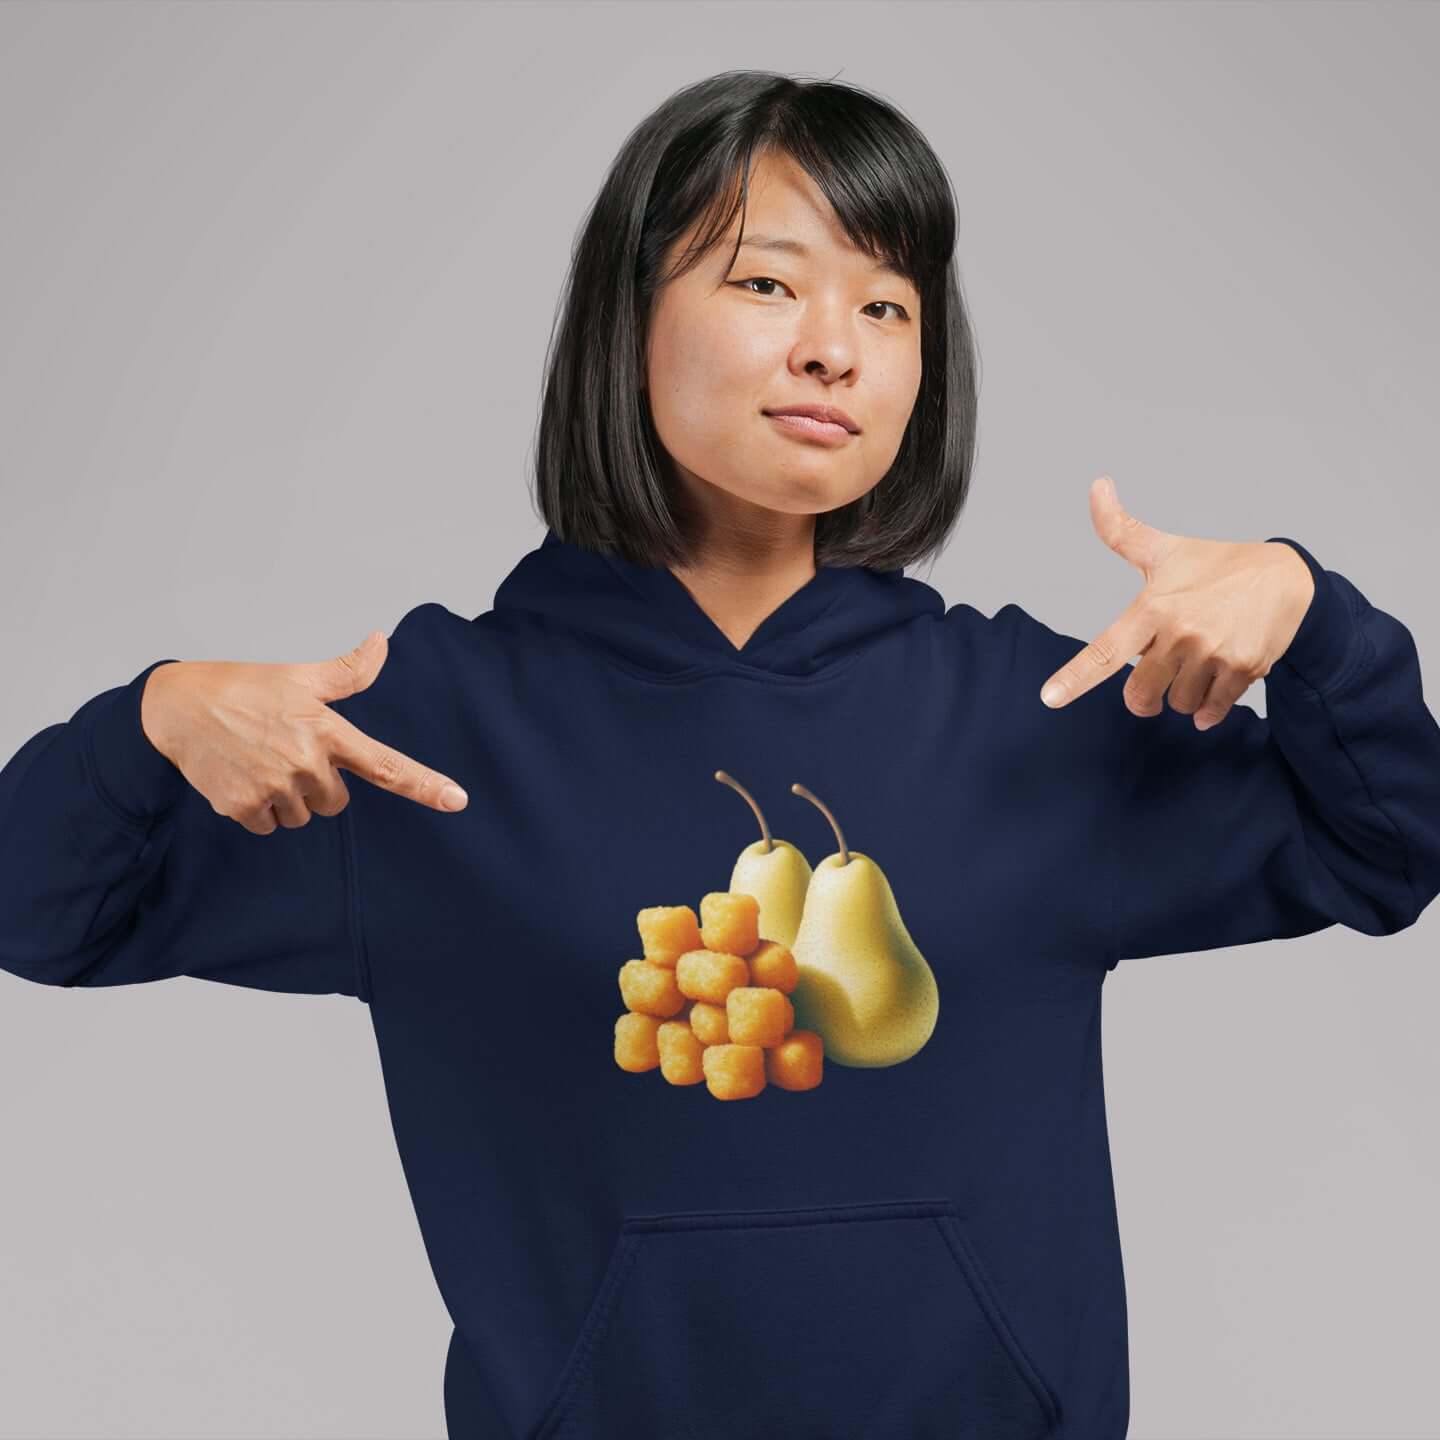 Woman wearing a navy blue hoodie with an image of tater tots and two pears printed on the front. She is pointing at the graphics on the hooded sweatshirt.